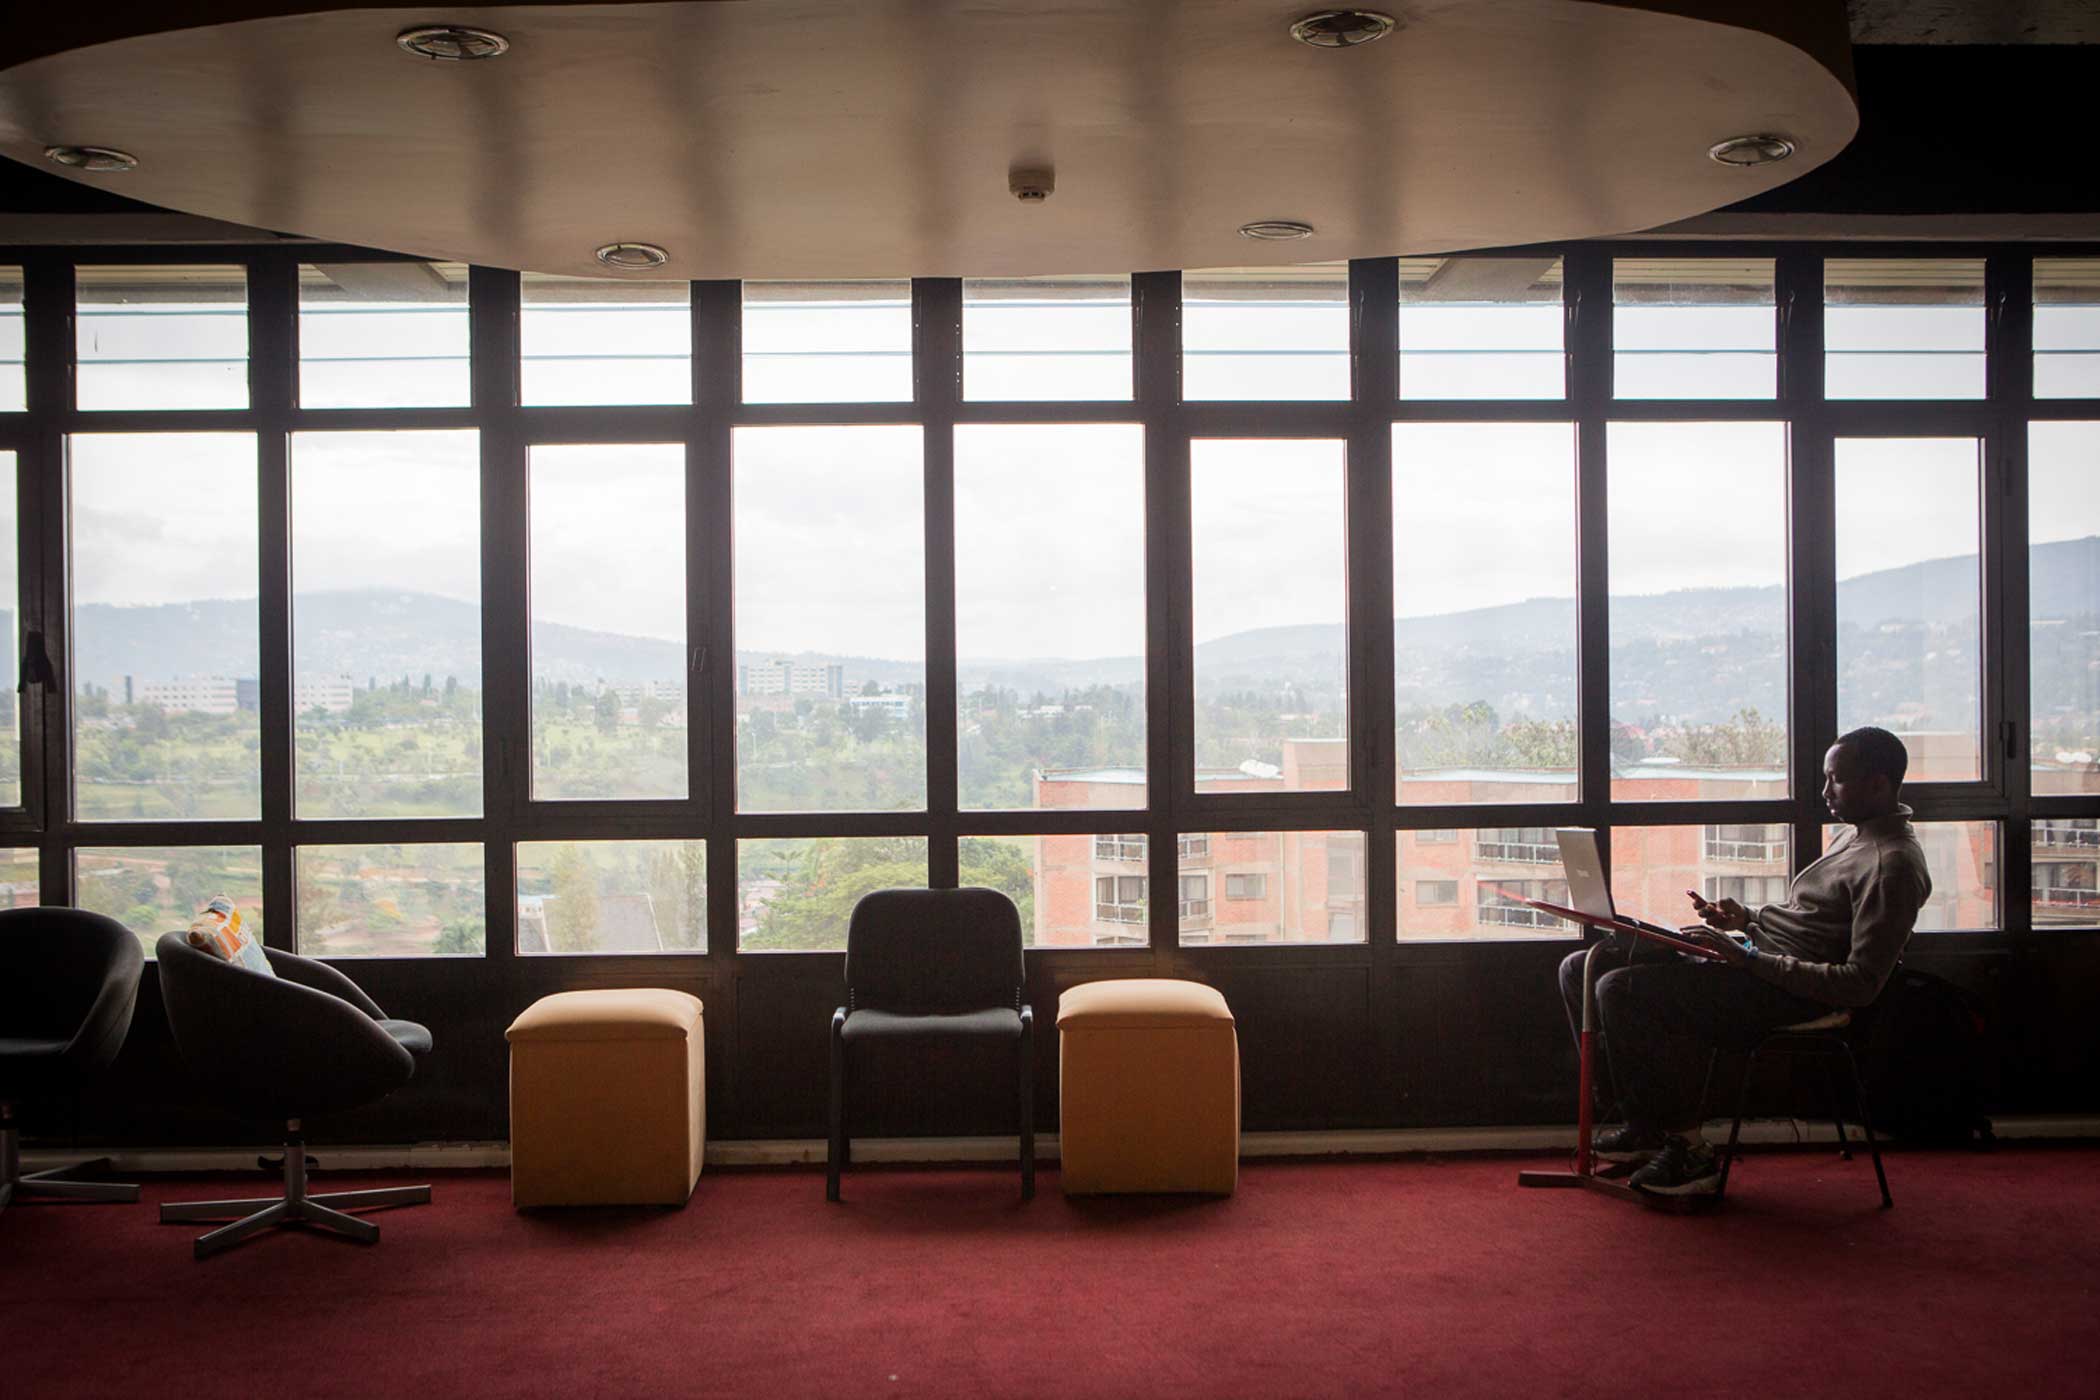 Inside kLab, a co-working space for tech entrepreneurs located in Telecom House in Kigali's future high-tech ICT neighborhood, Kacyiru.